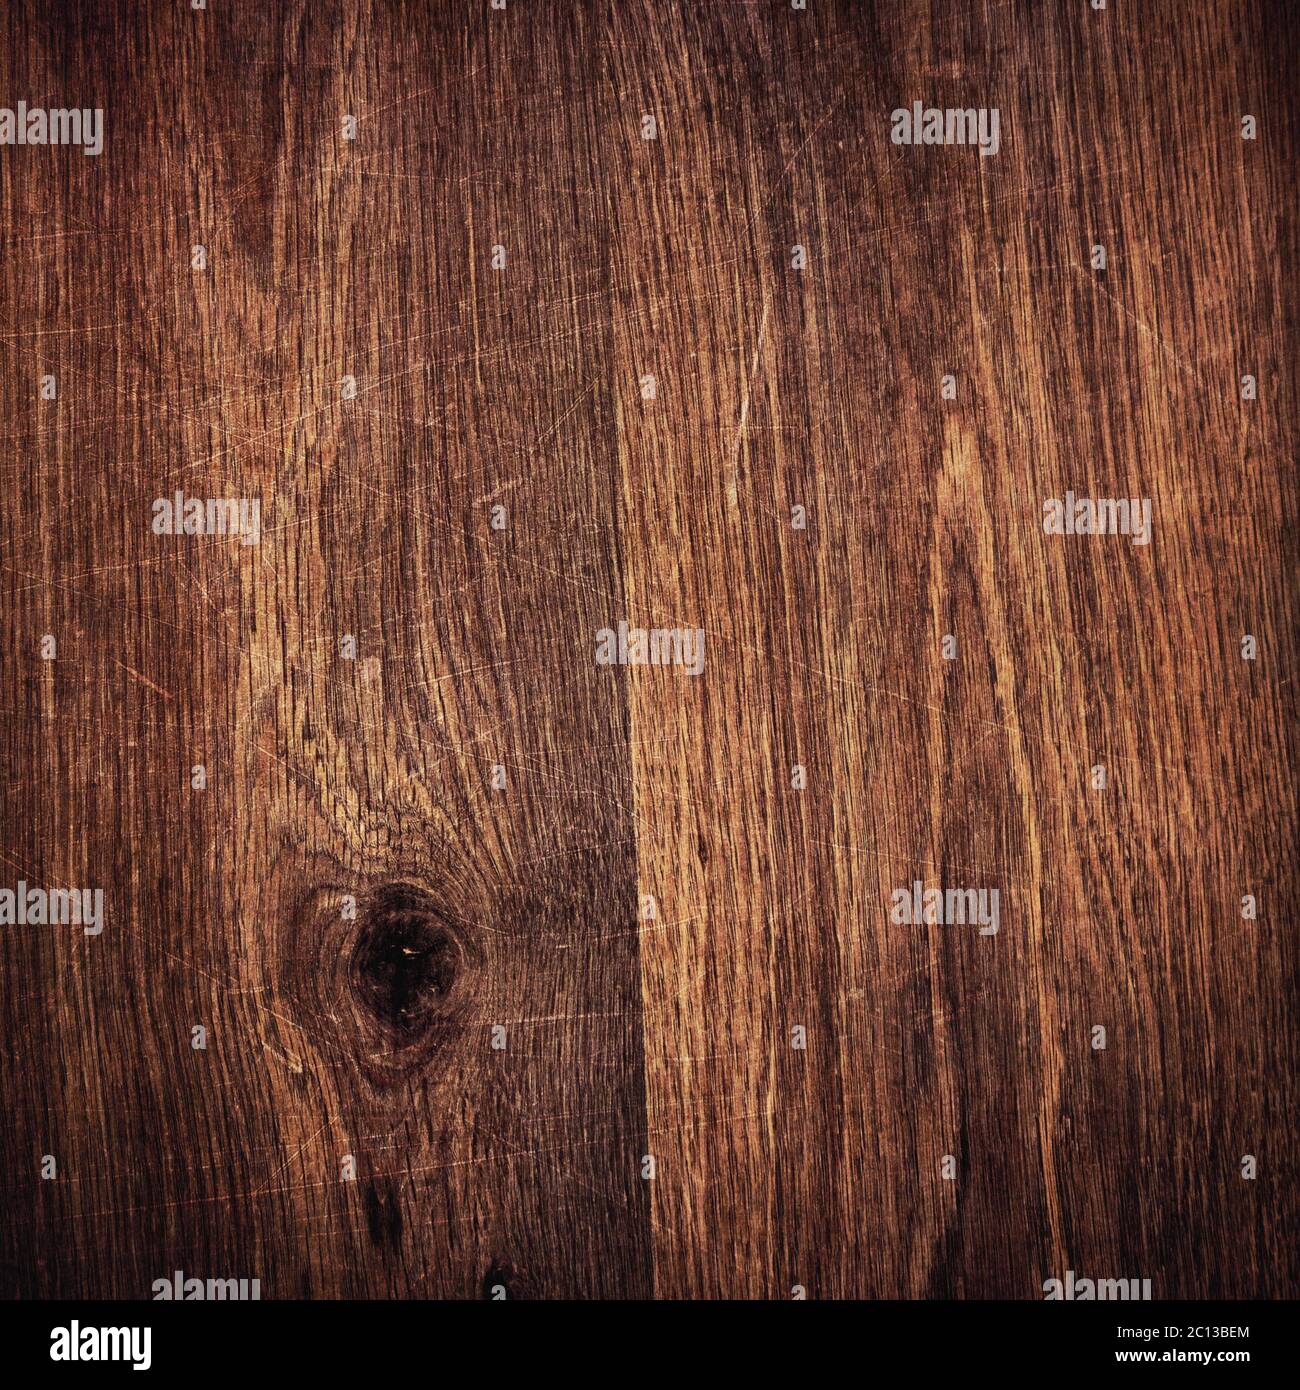 wooden background texture of table desk Stock Photo